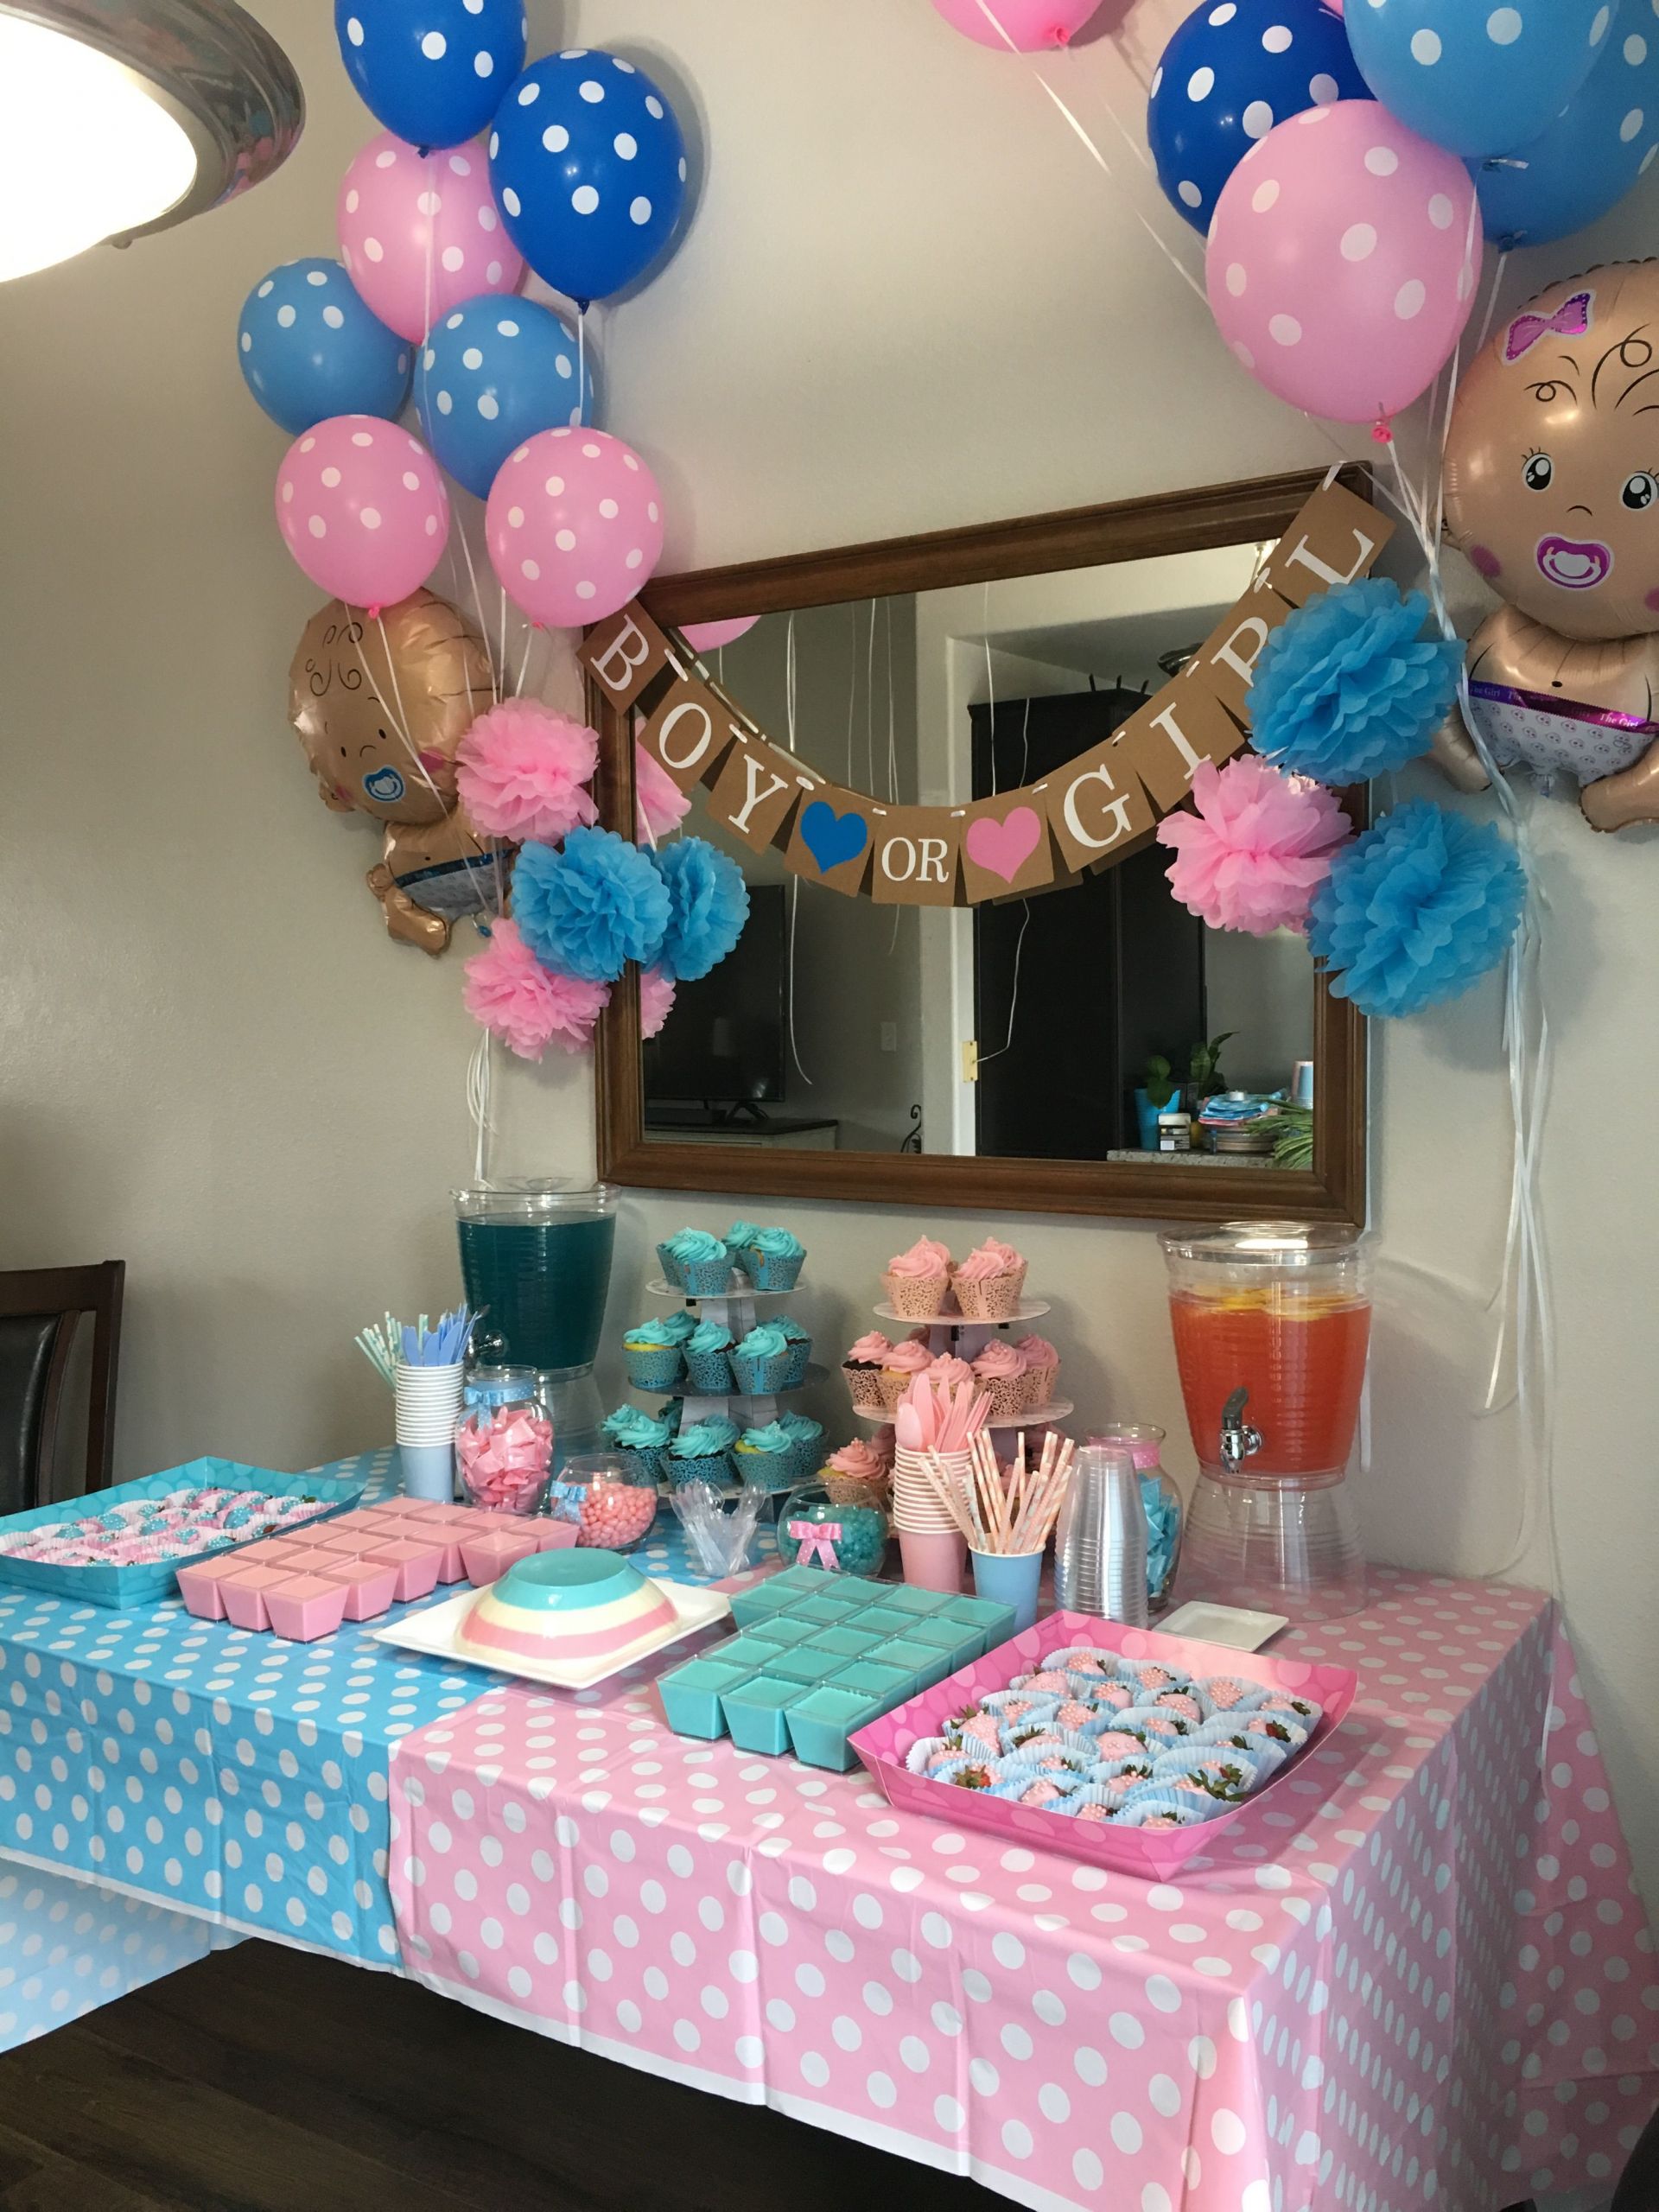 Good Ideas For Gender Reveal Party
 Pin on Gender reveal party